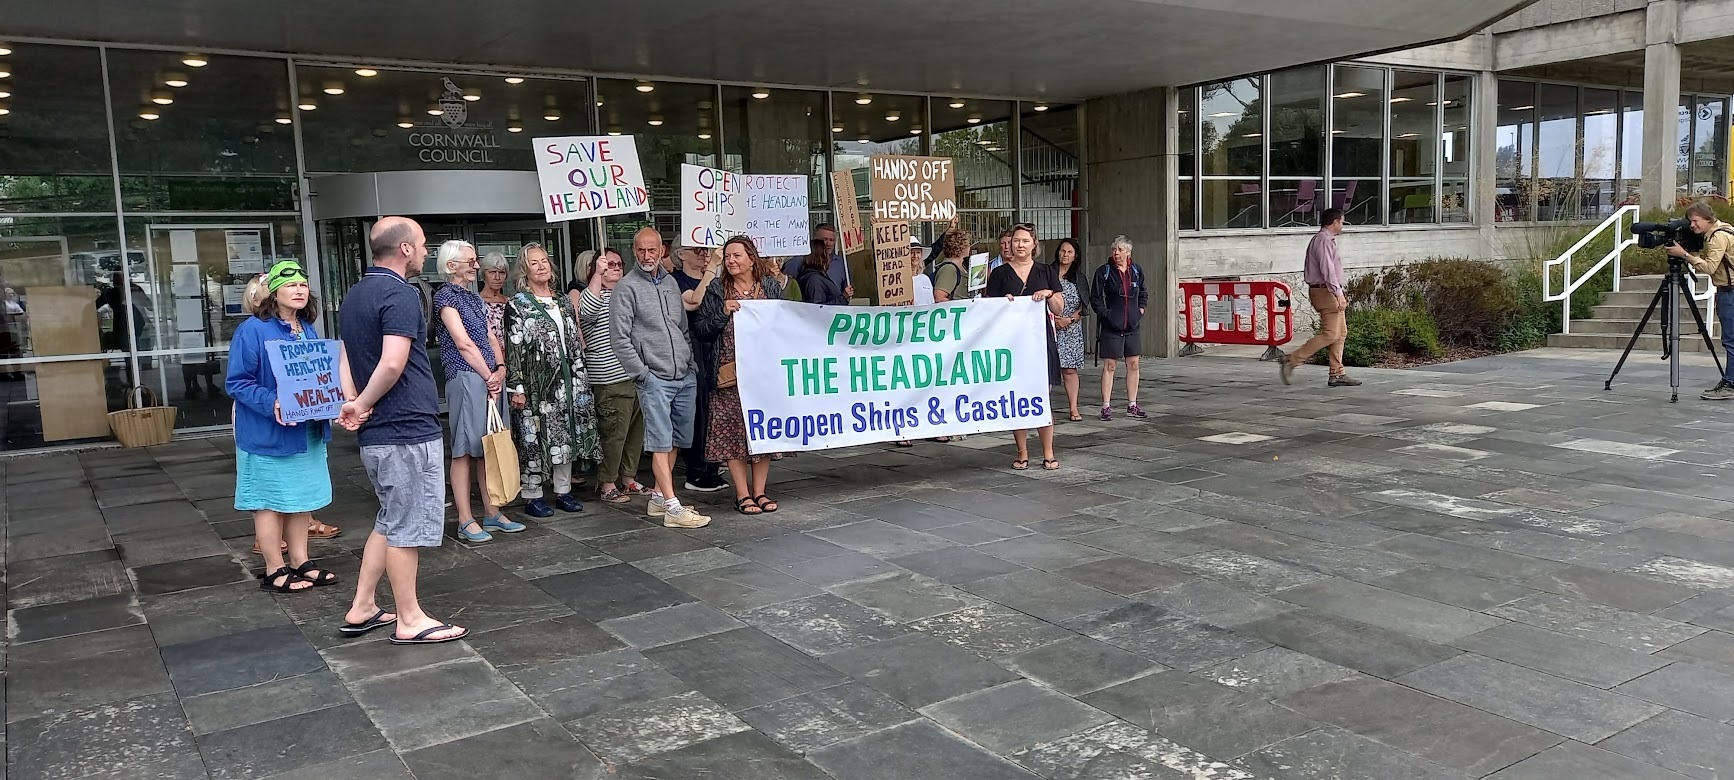 Protestors gathered outside New County Hall